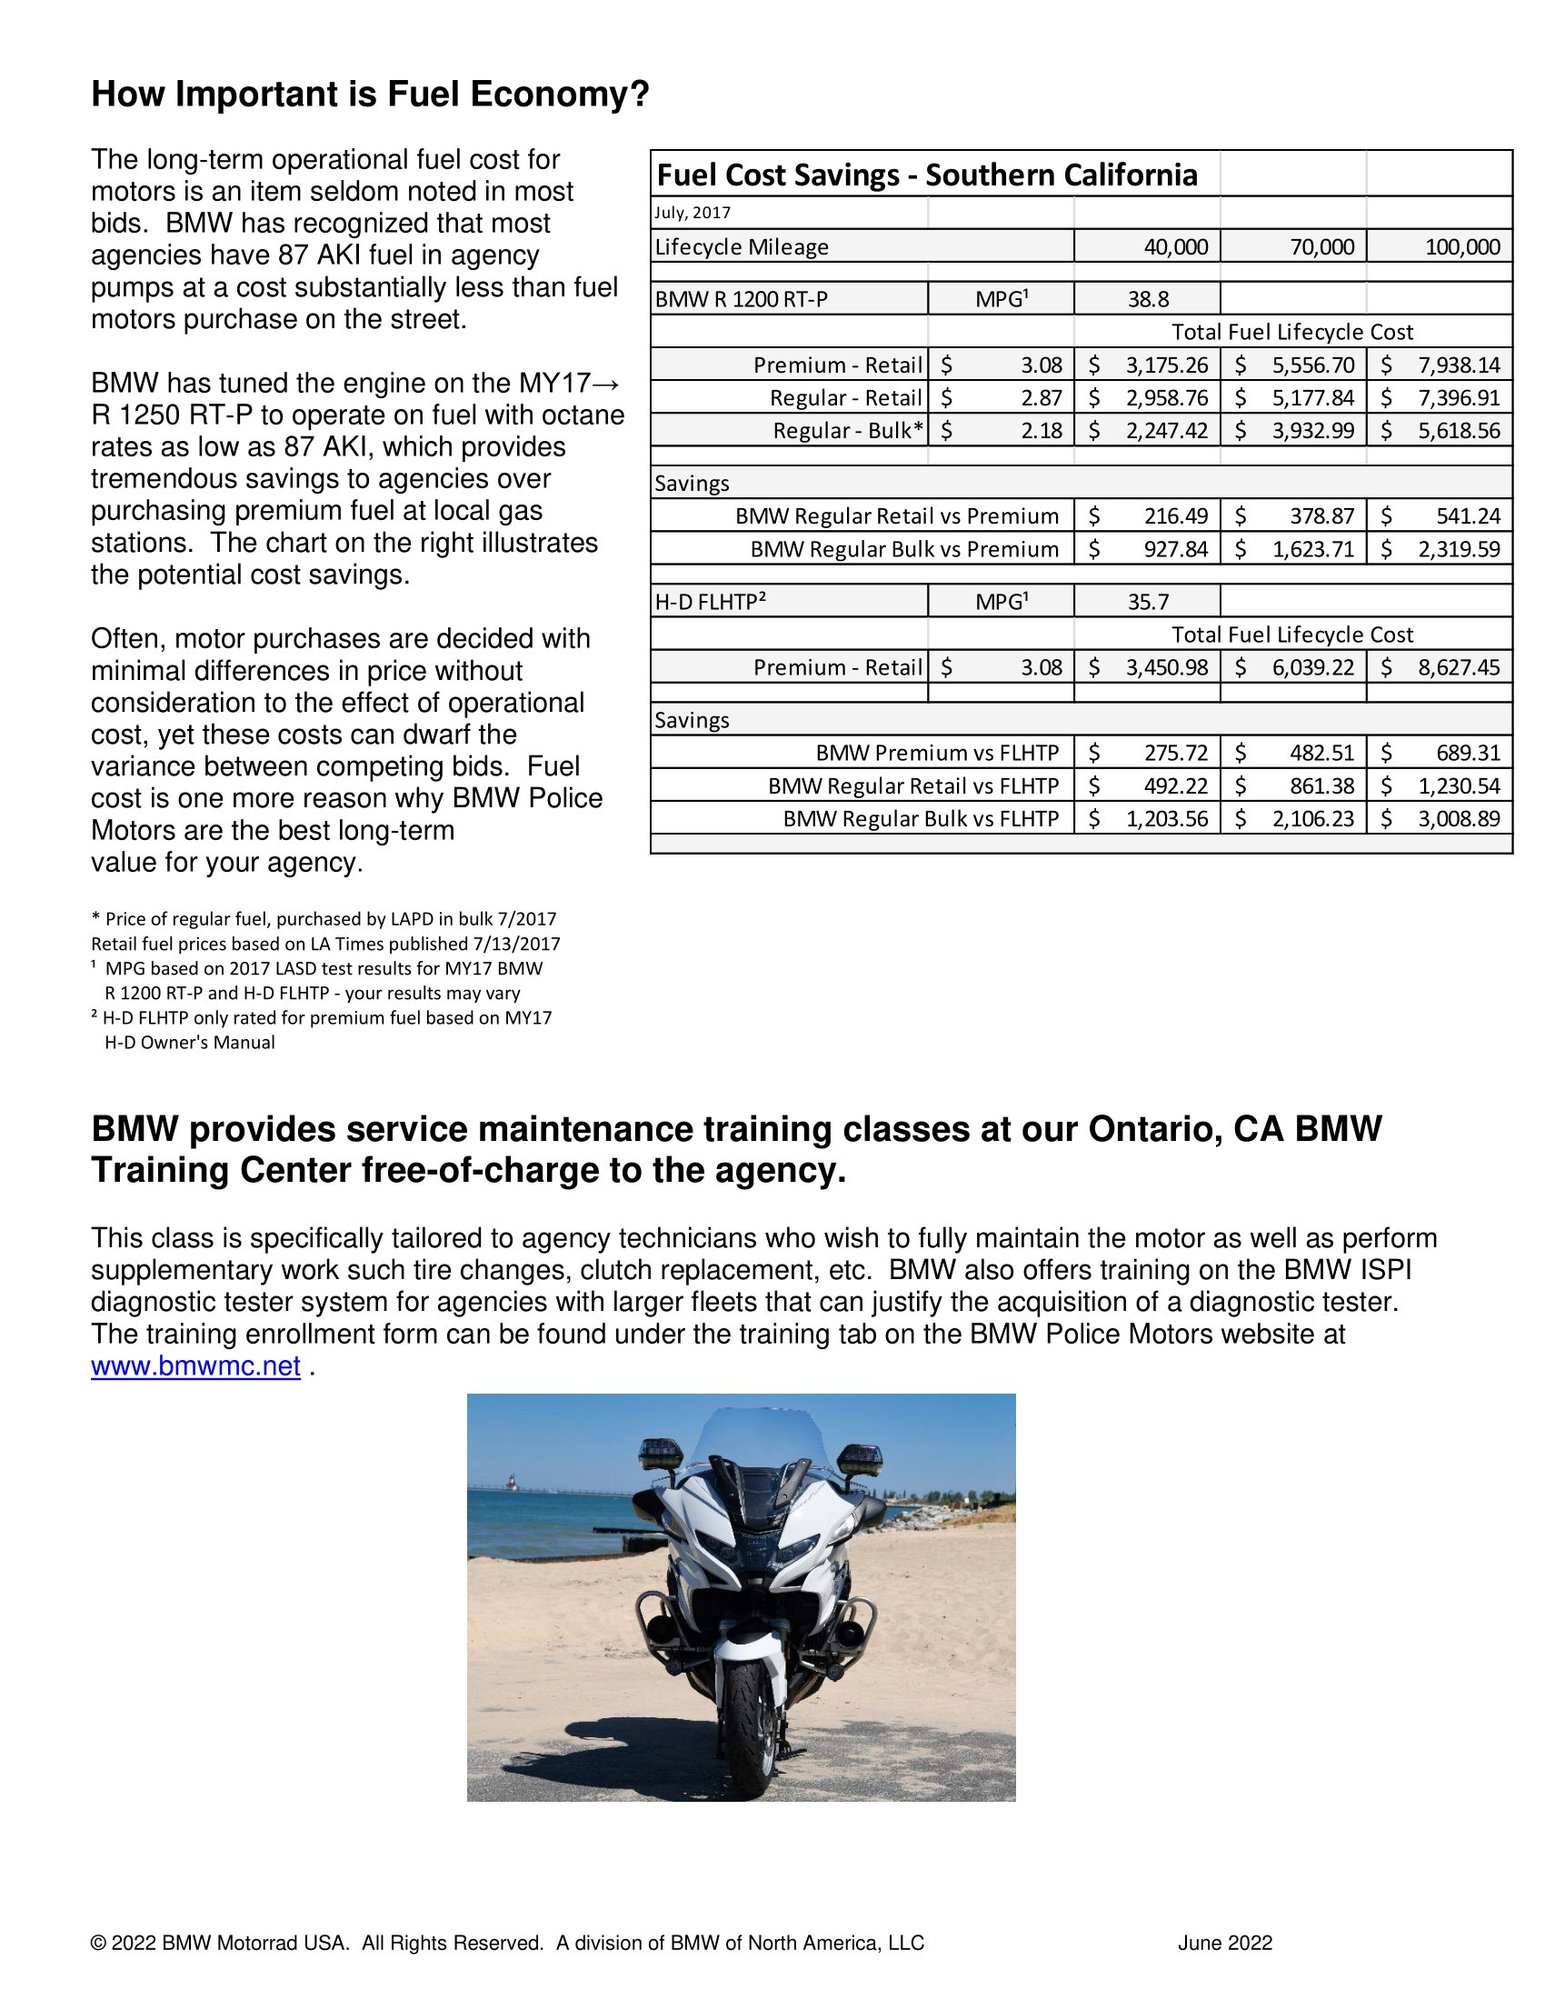 The R 1250 RT-P page 8